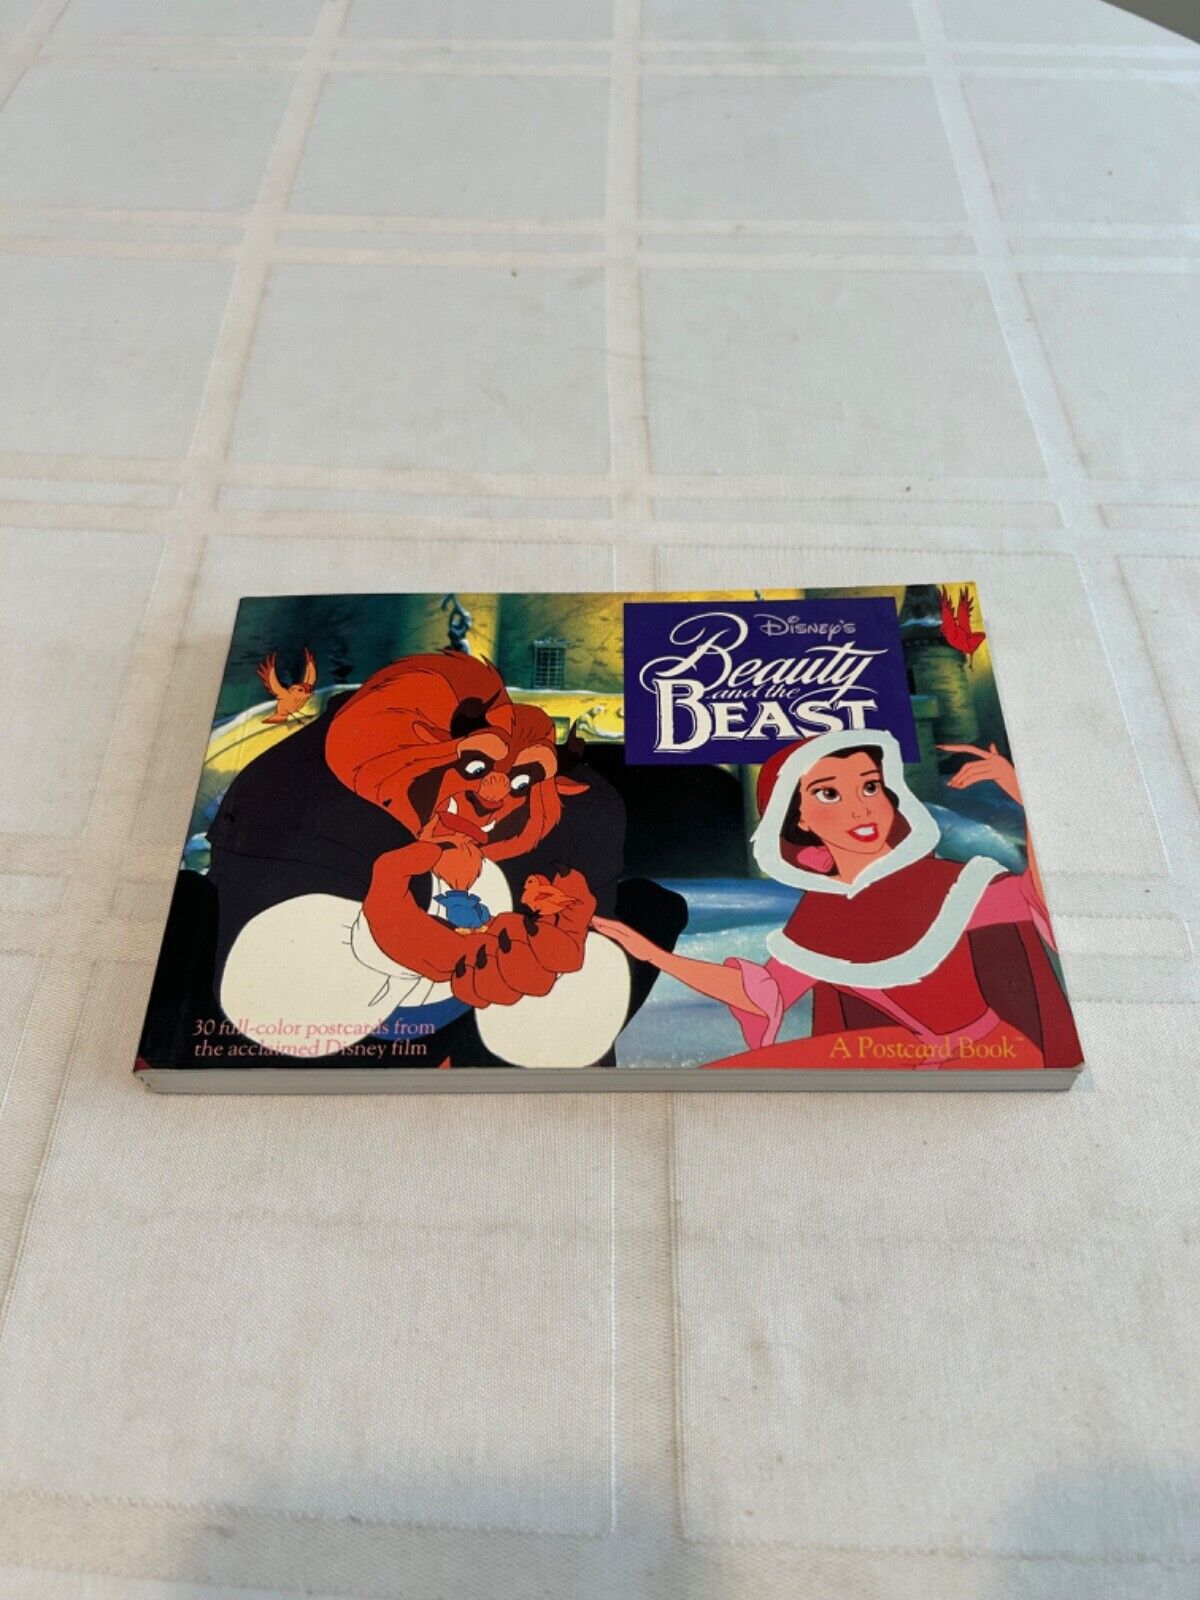 Disney Beauty and the Beast 30 postcard book